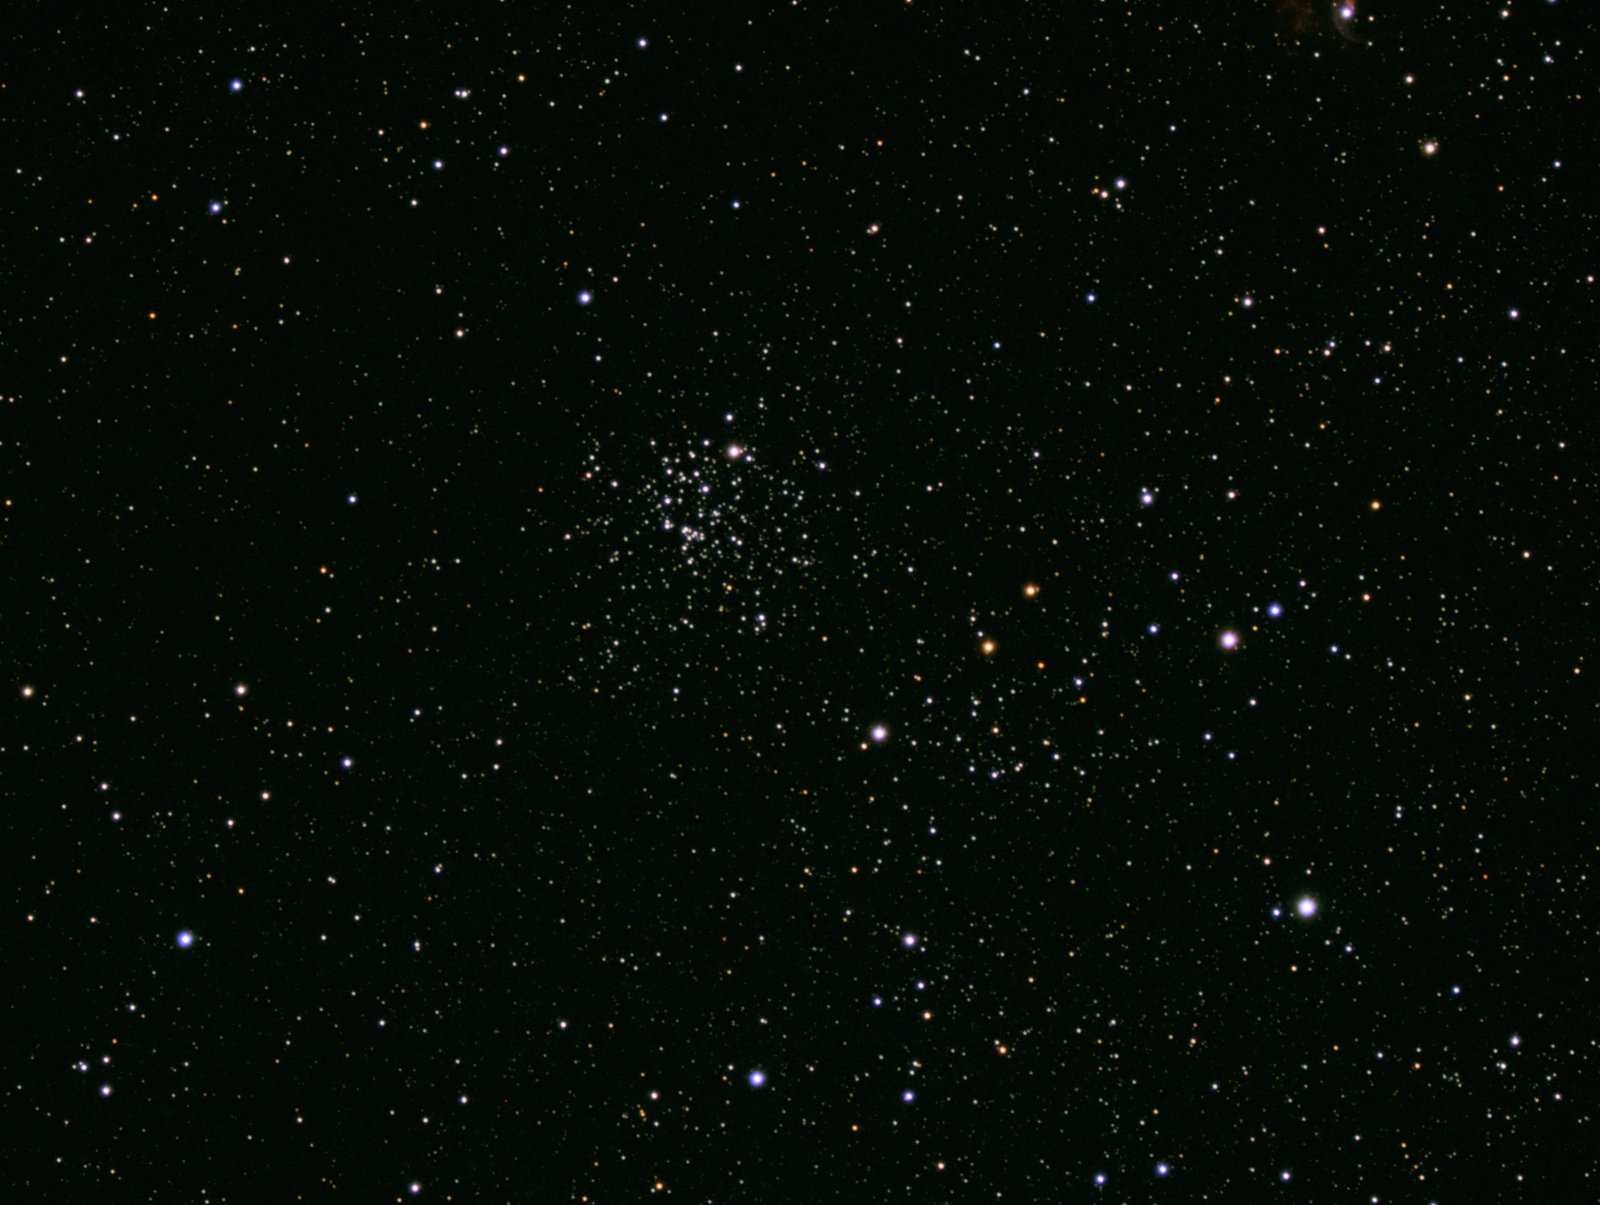 M52 with a little processing in MS Photo